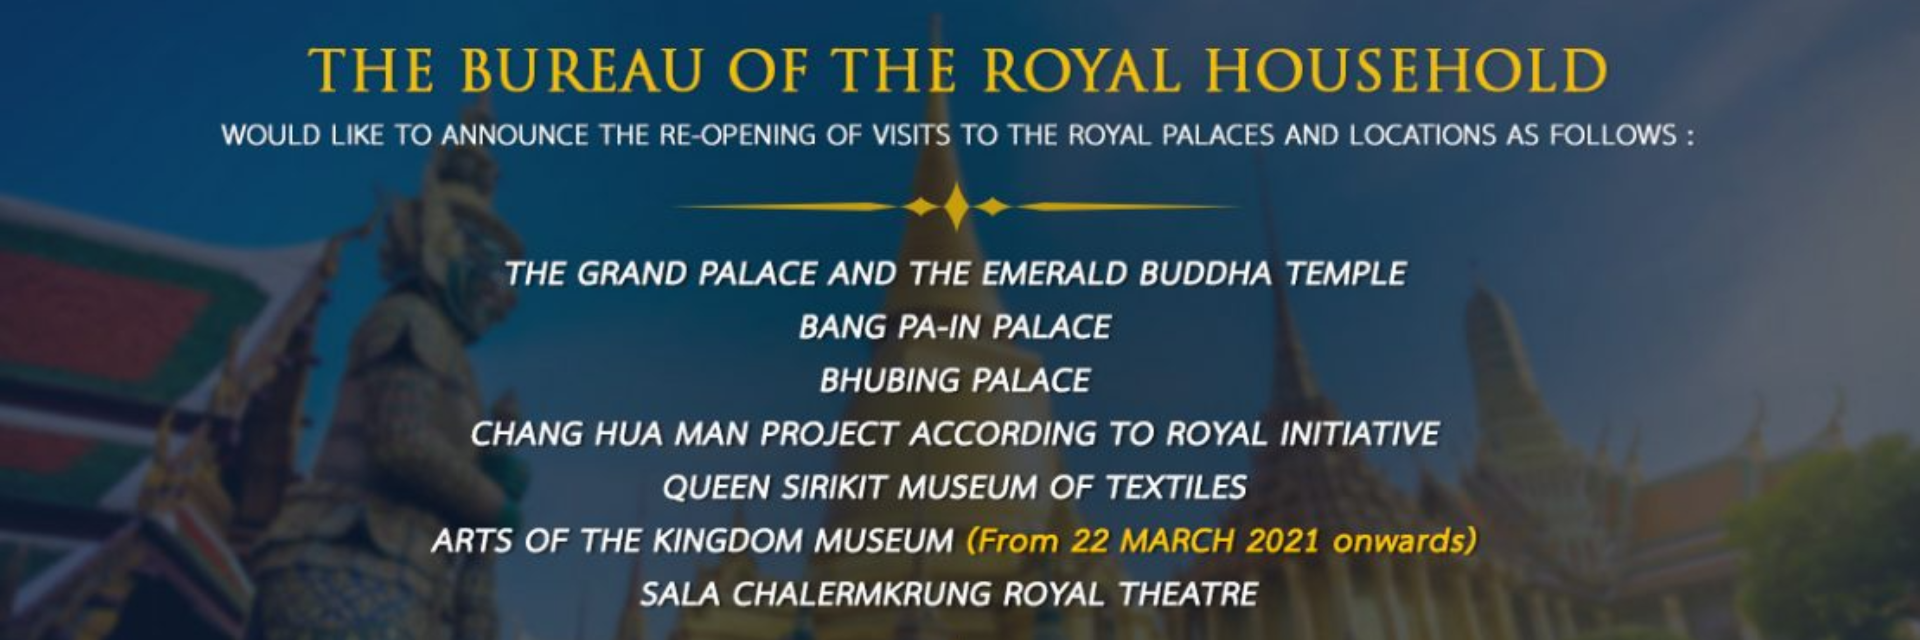 The Bureau of The Royal Household would like to announce the re-opening of visite to The Royal Palaces and locations